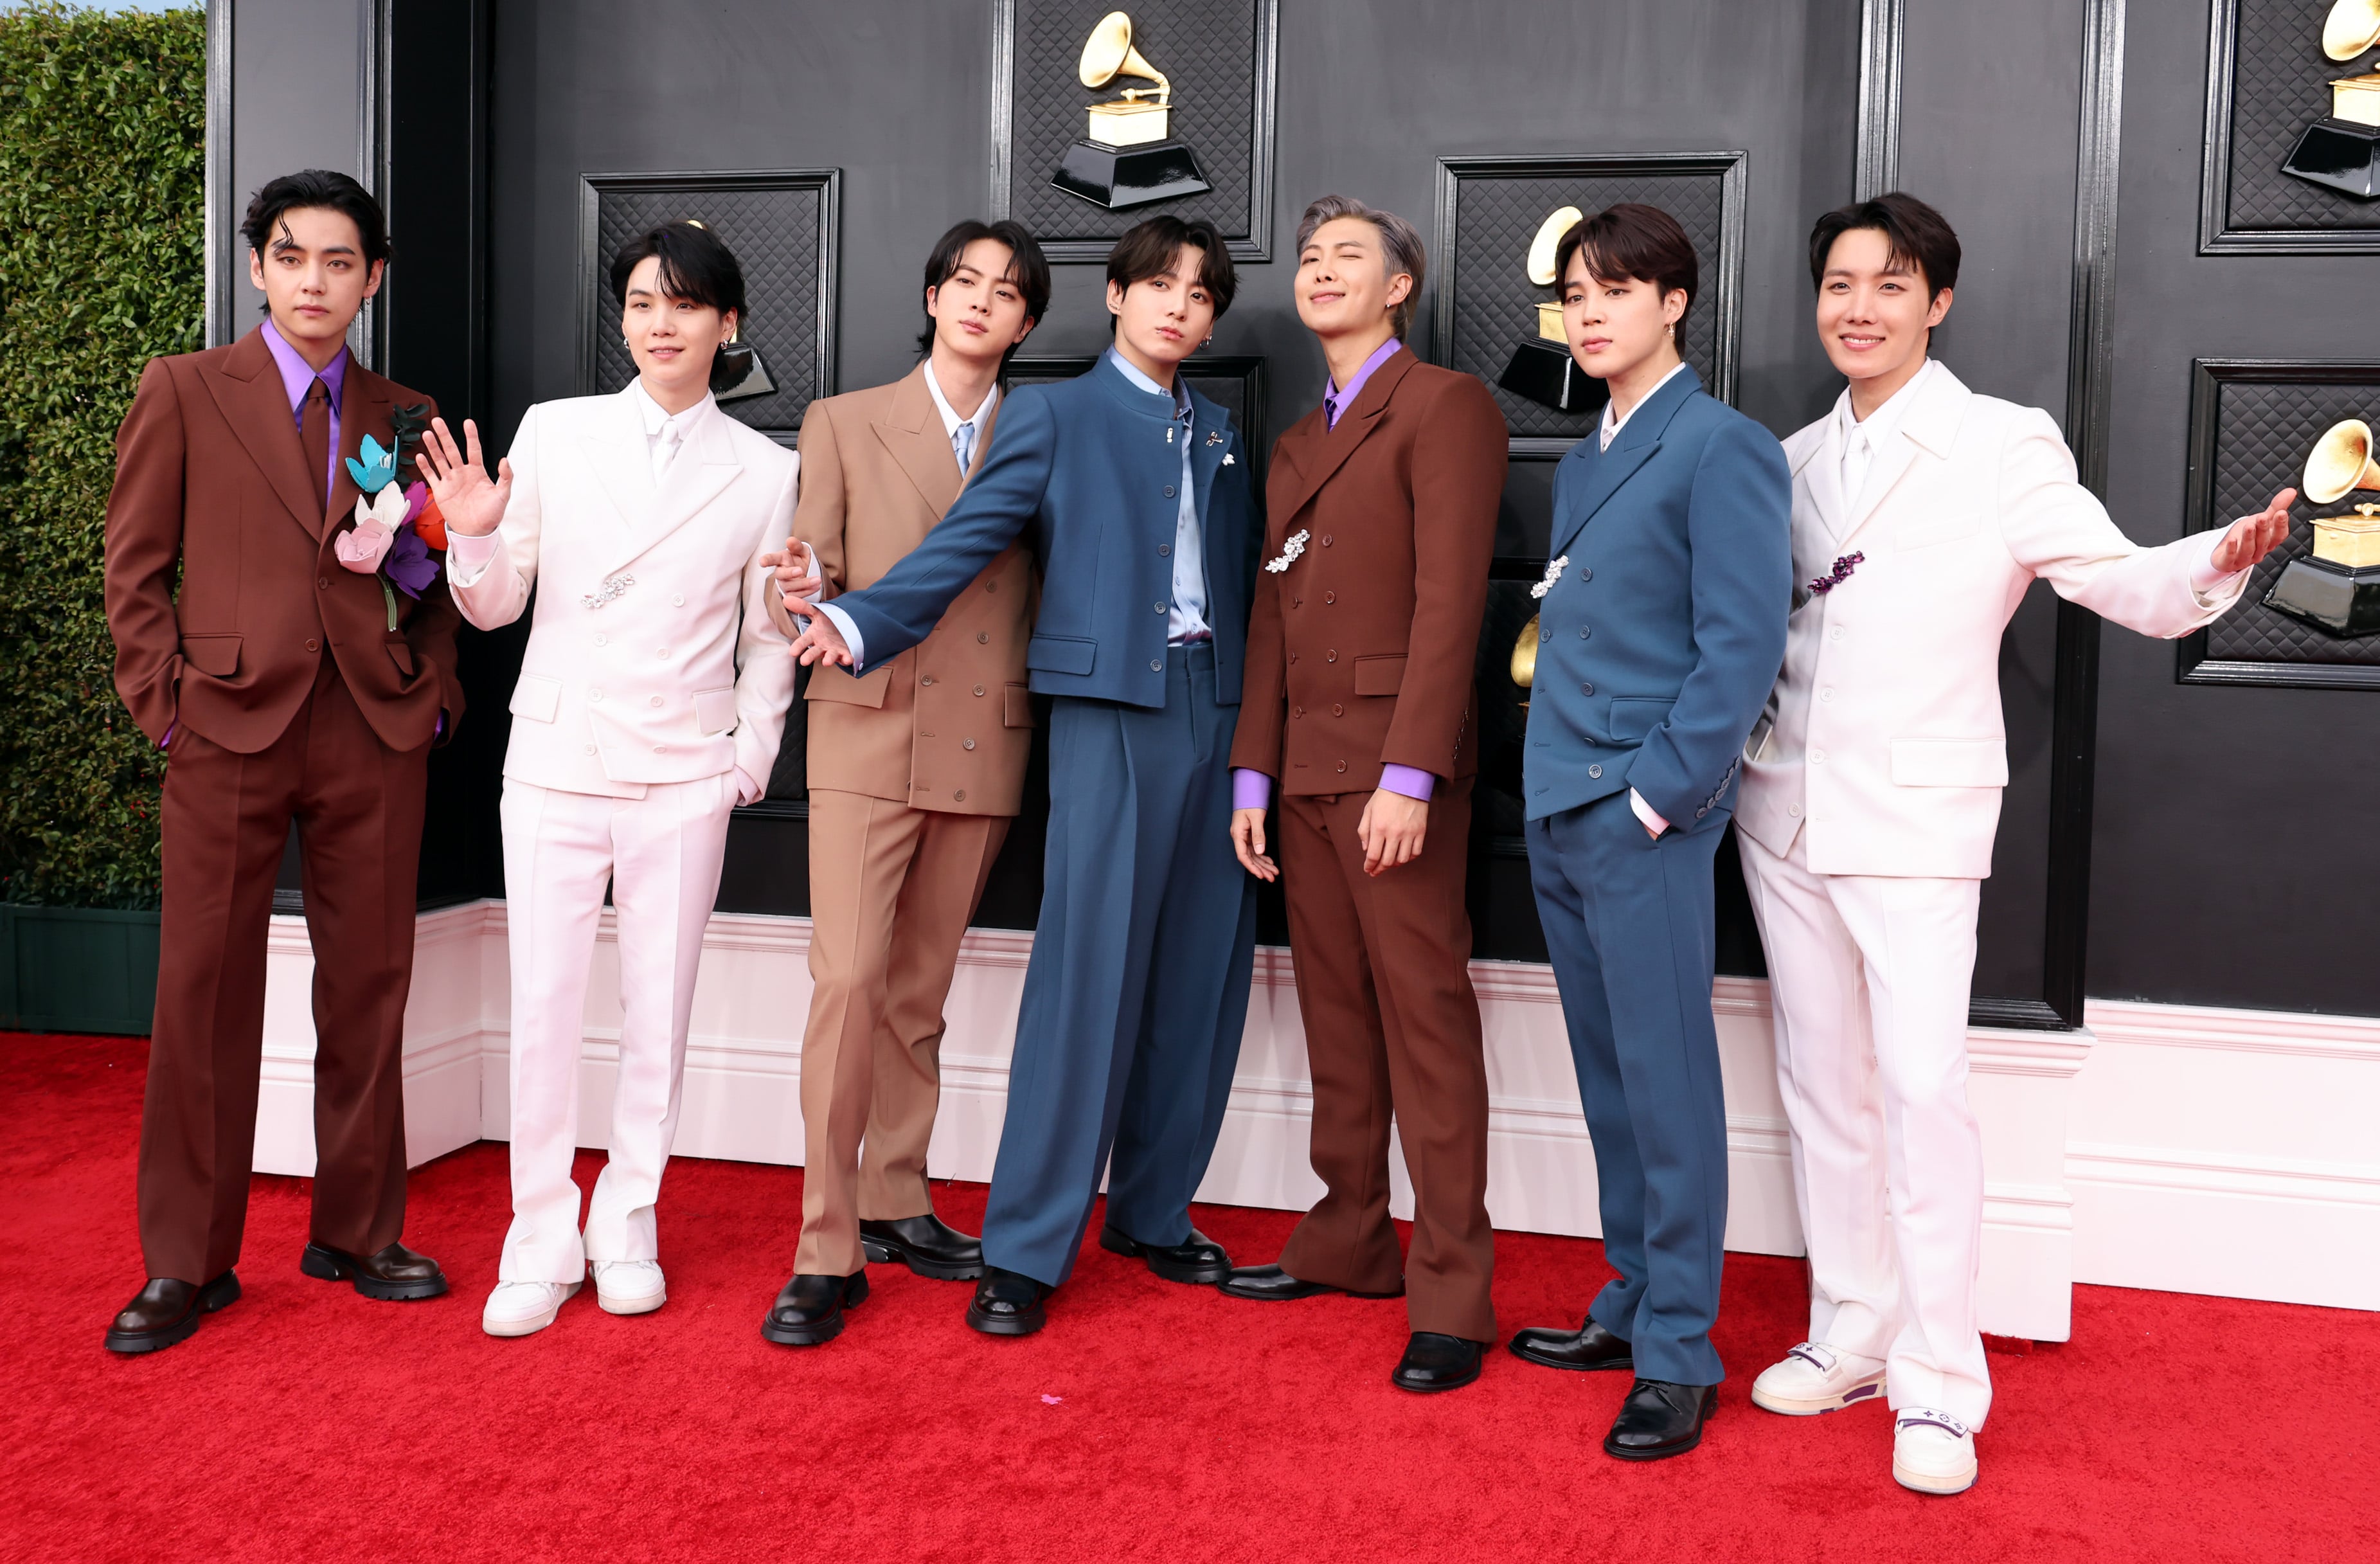 Will BTS make history with its first win at 65th Grammy Awards?